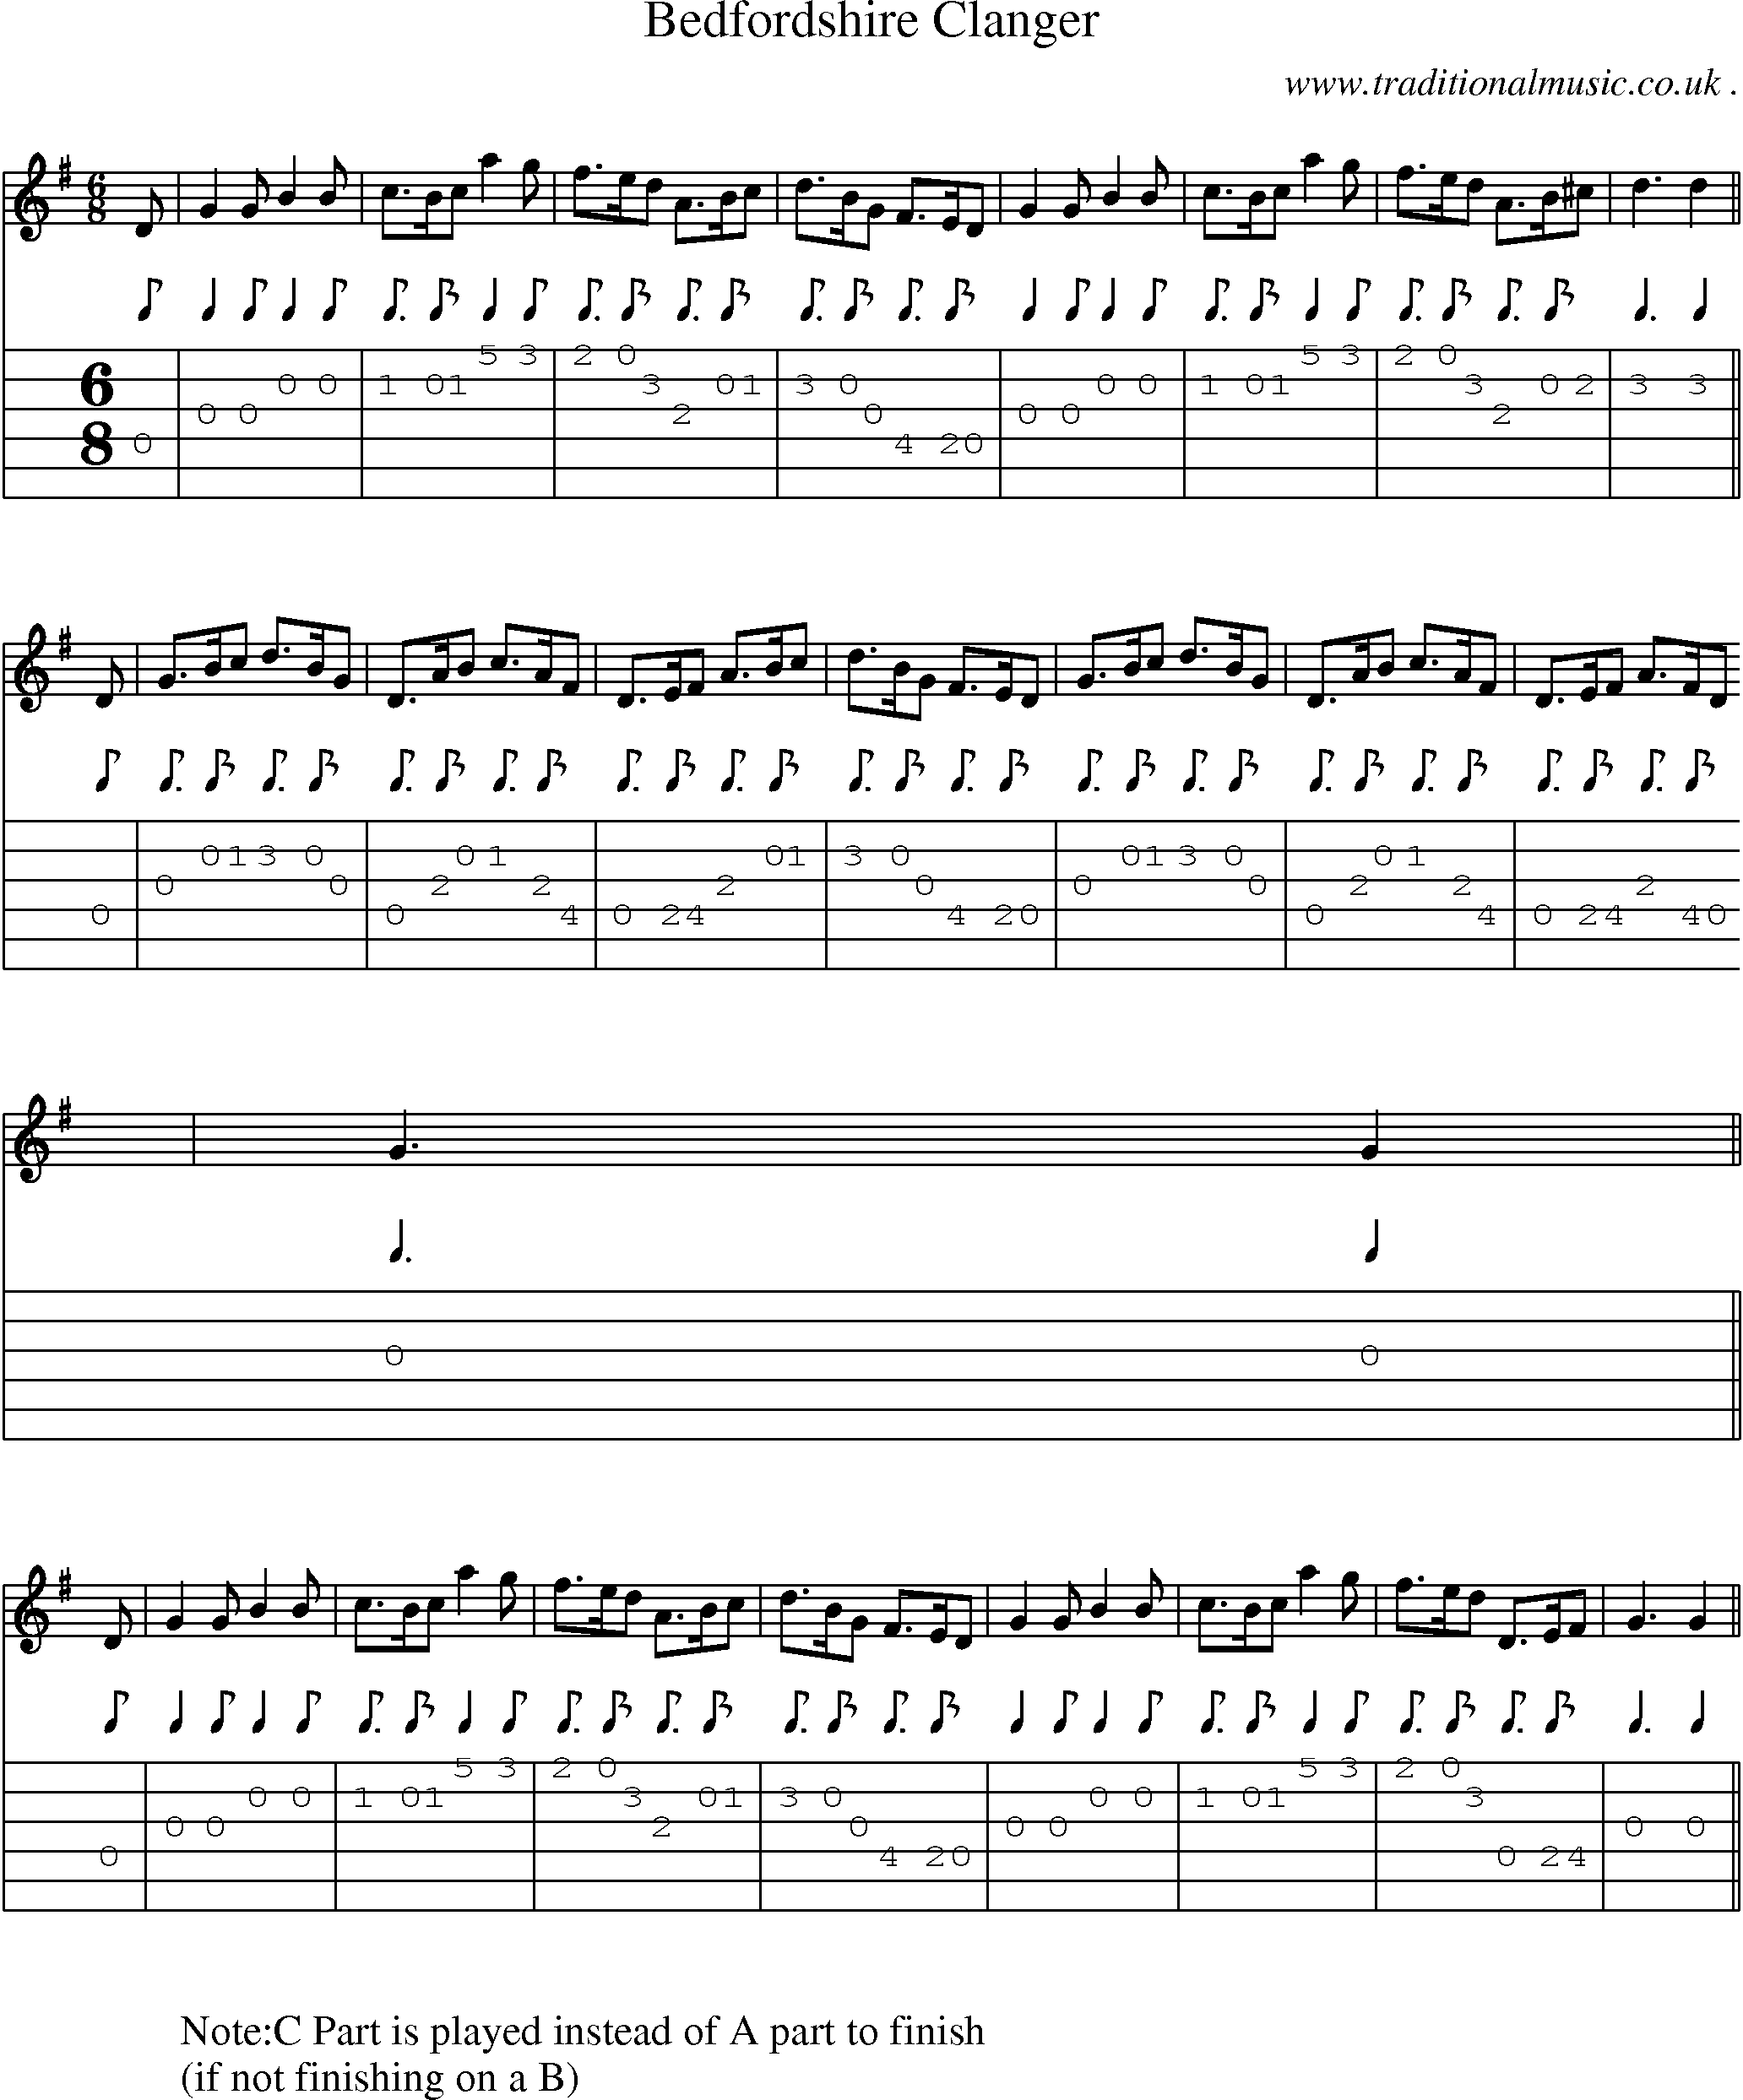 Sheet-Music and Guitar Tabs for Bedfordshire Clanger